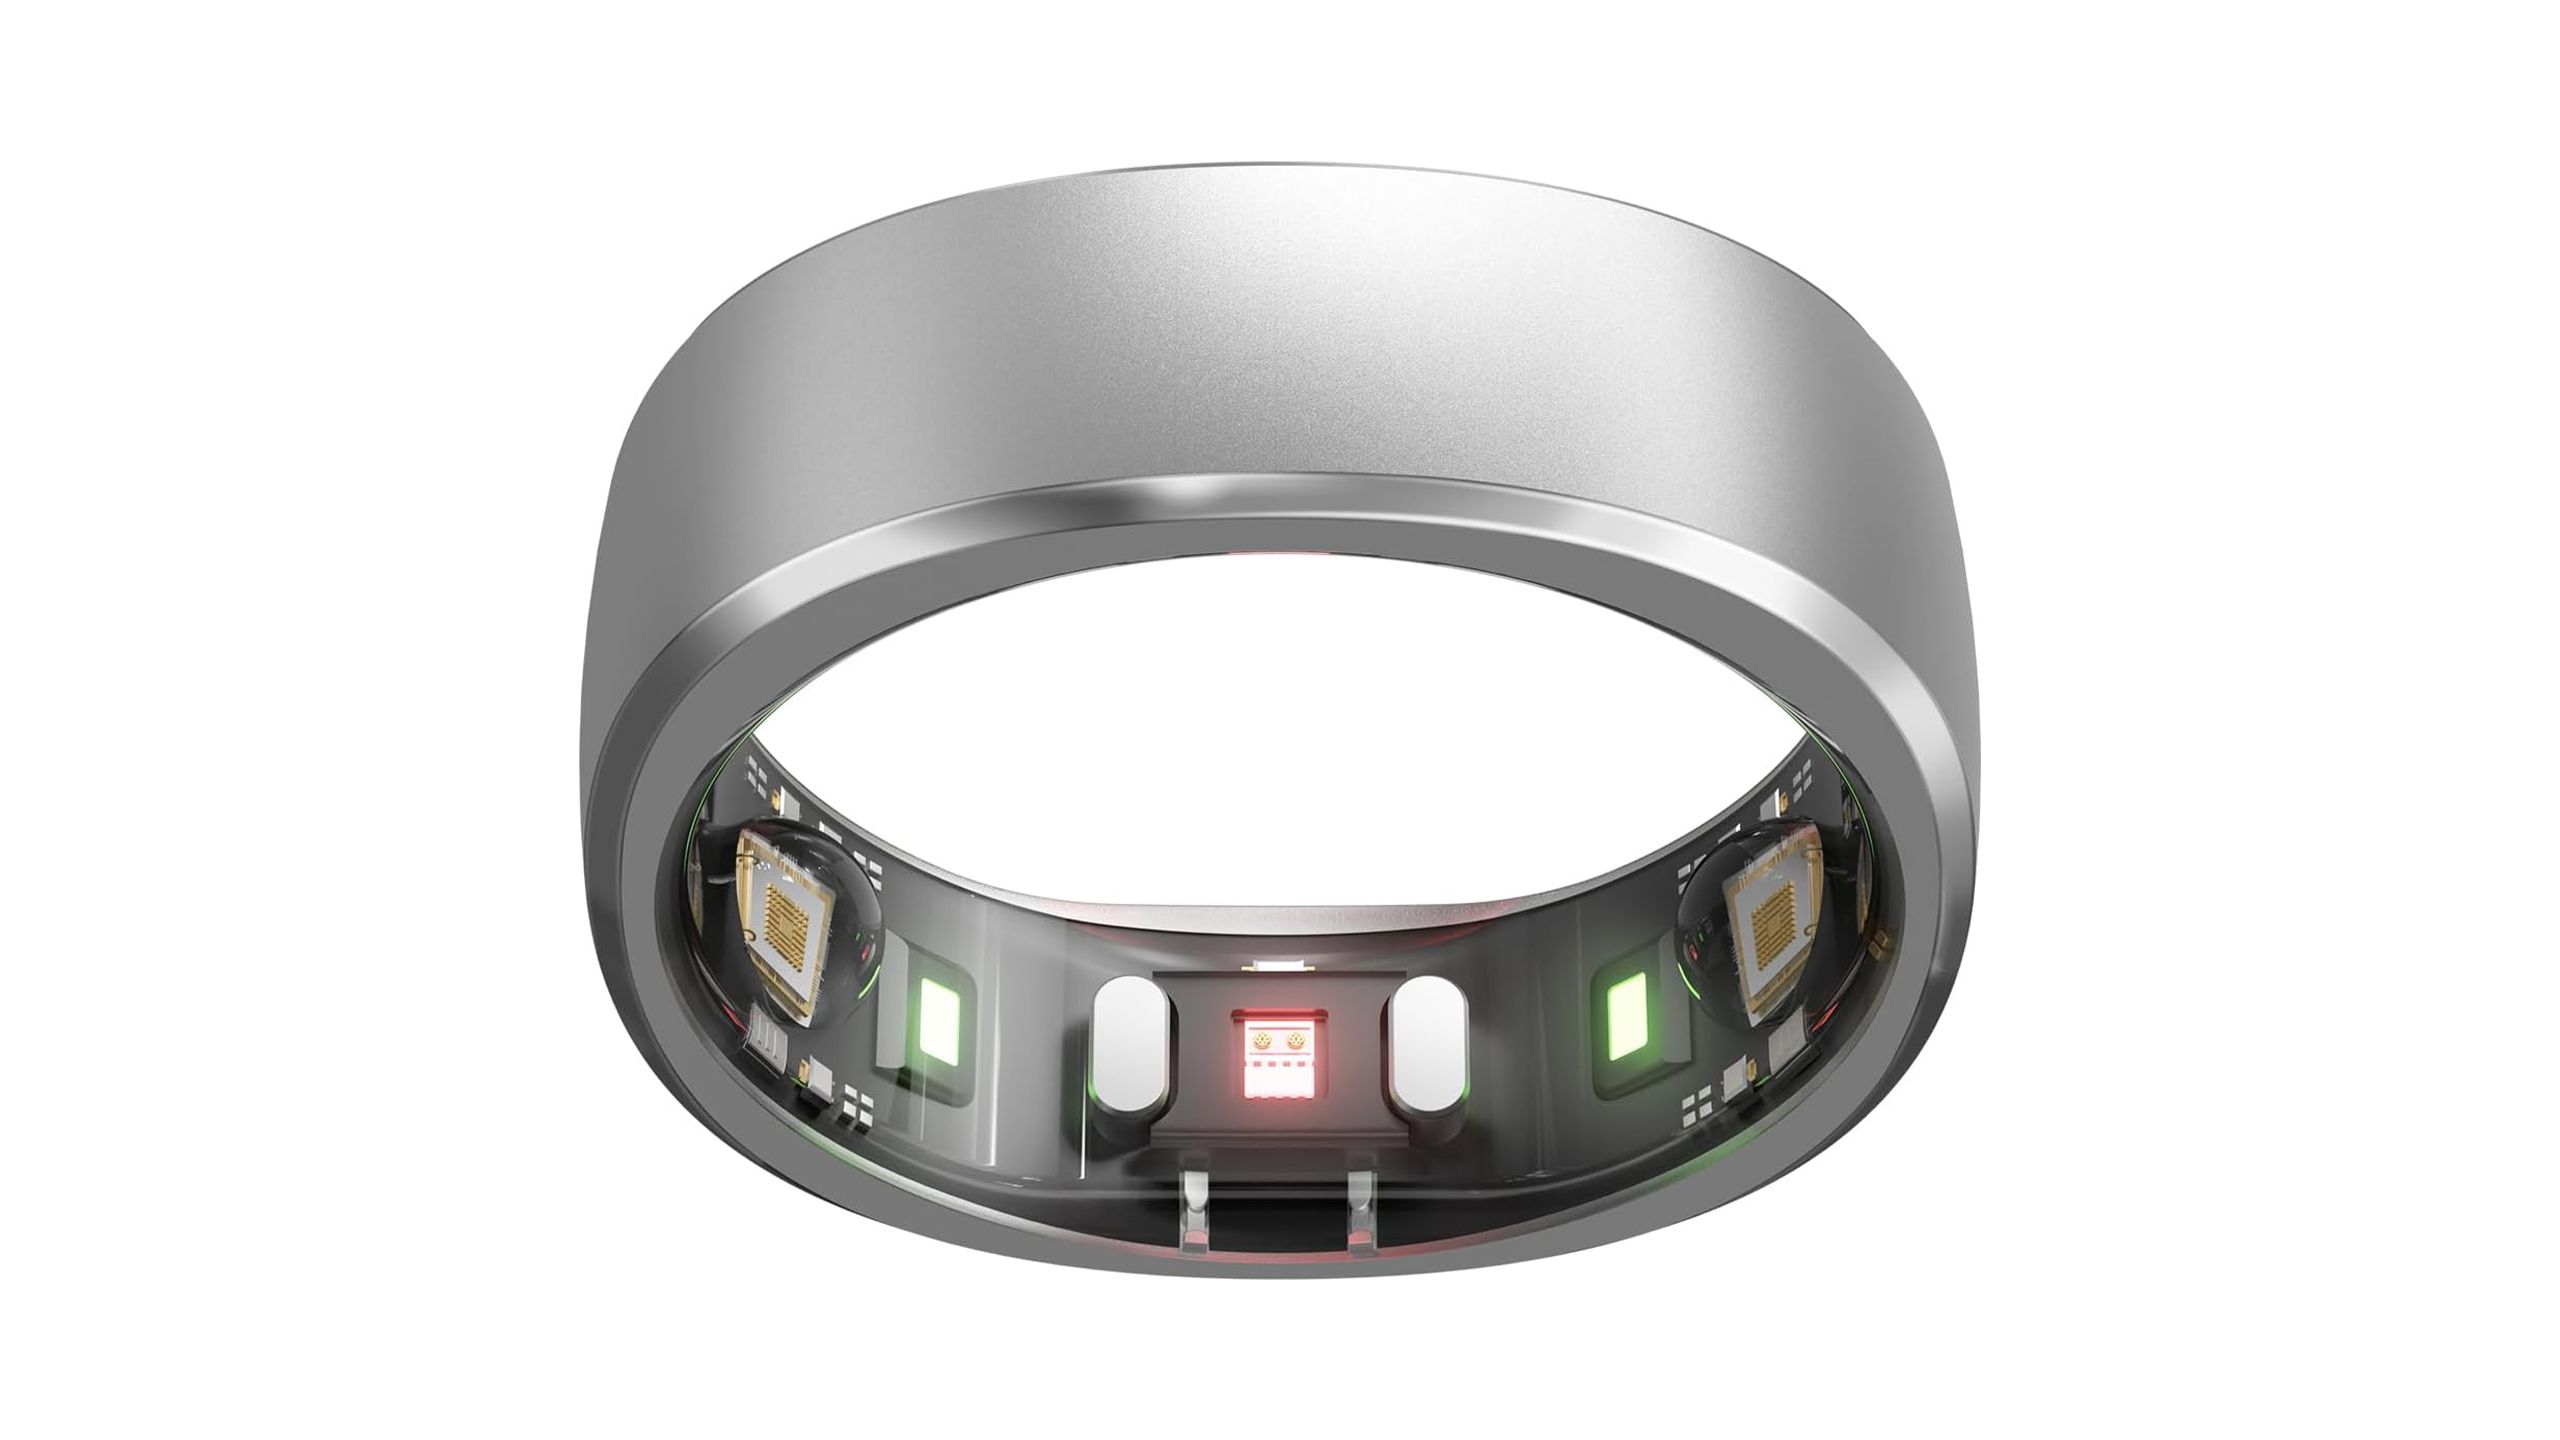 The RingConn Smart Ring against a white background. 